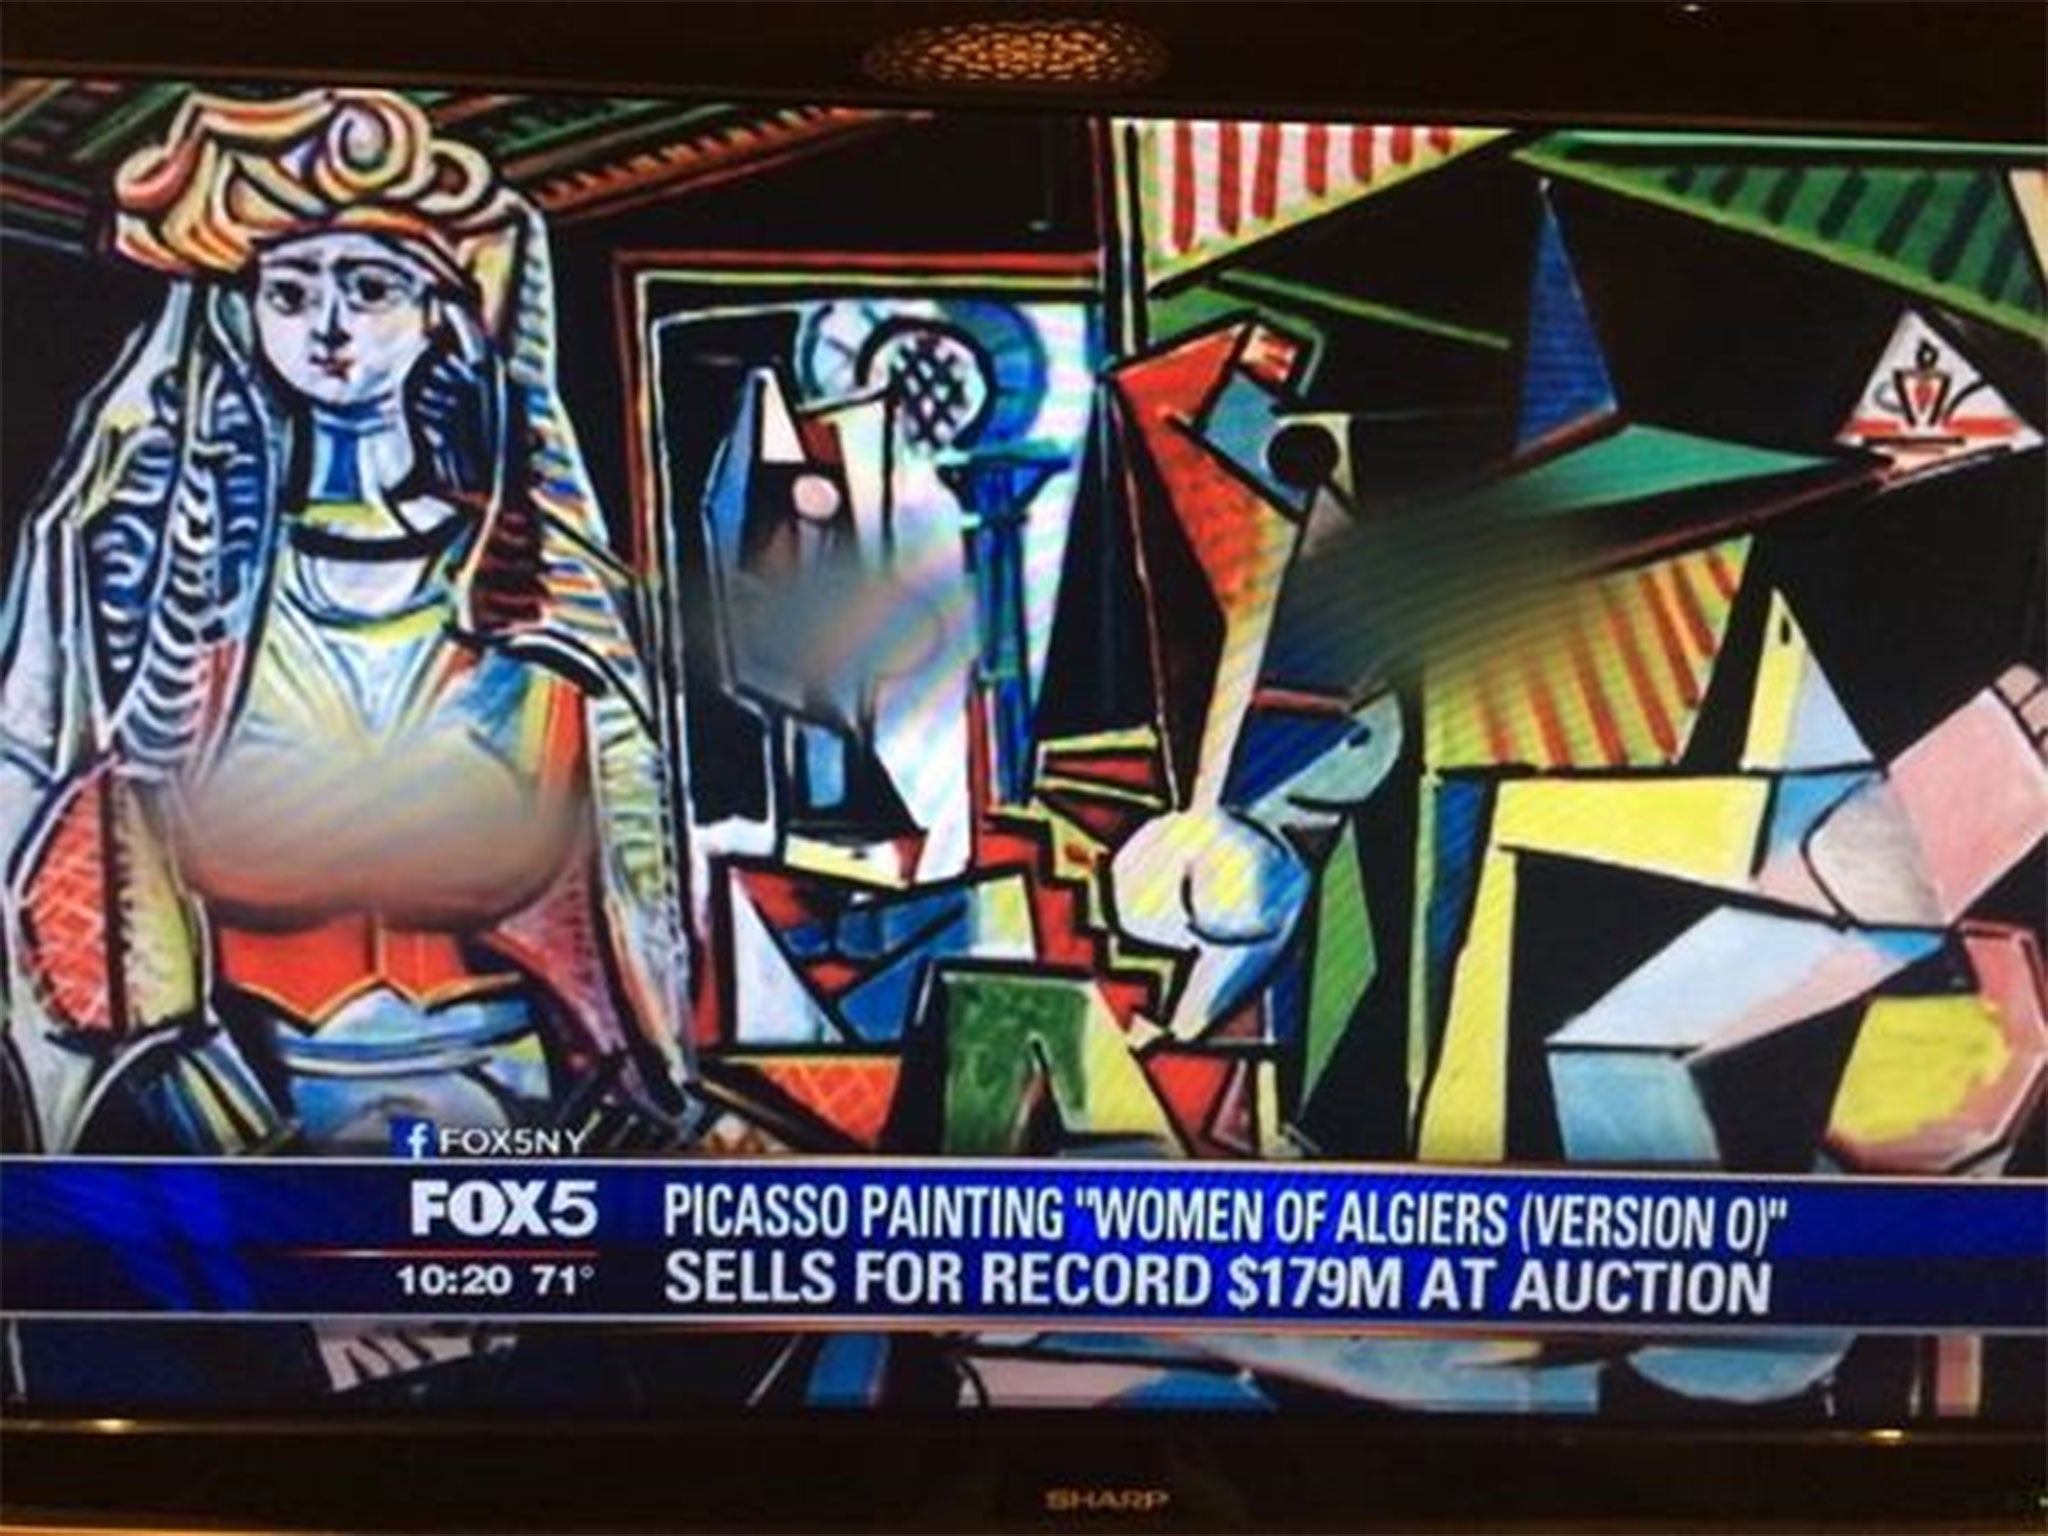 Fox News decided to cover up the breasts and genitals depicted in Picasso's Women of Algiers, which sold for a record auction price of $179m this week